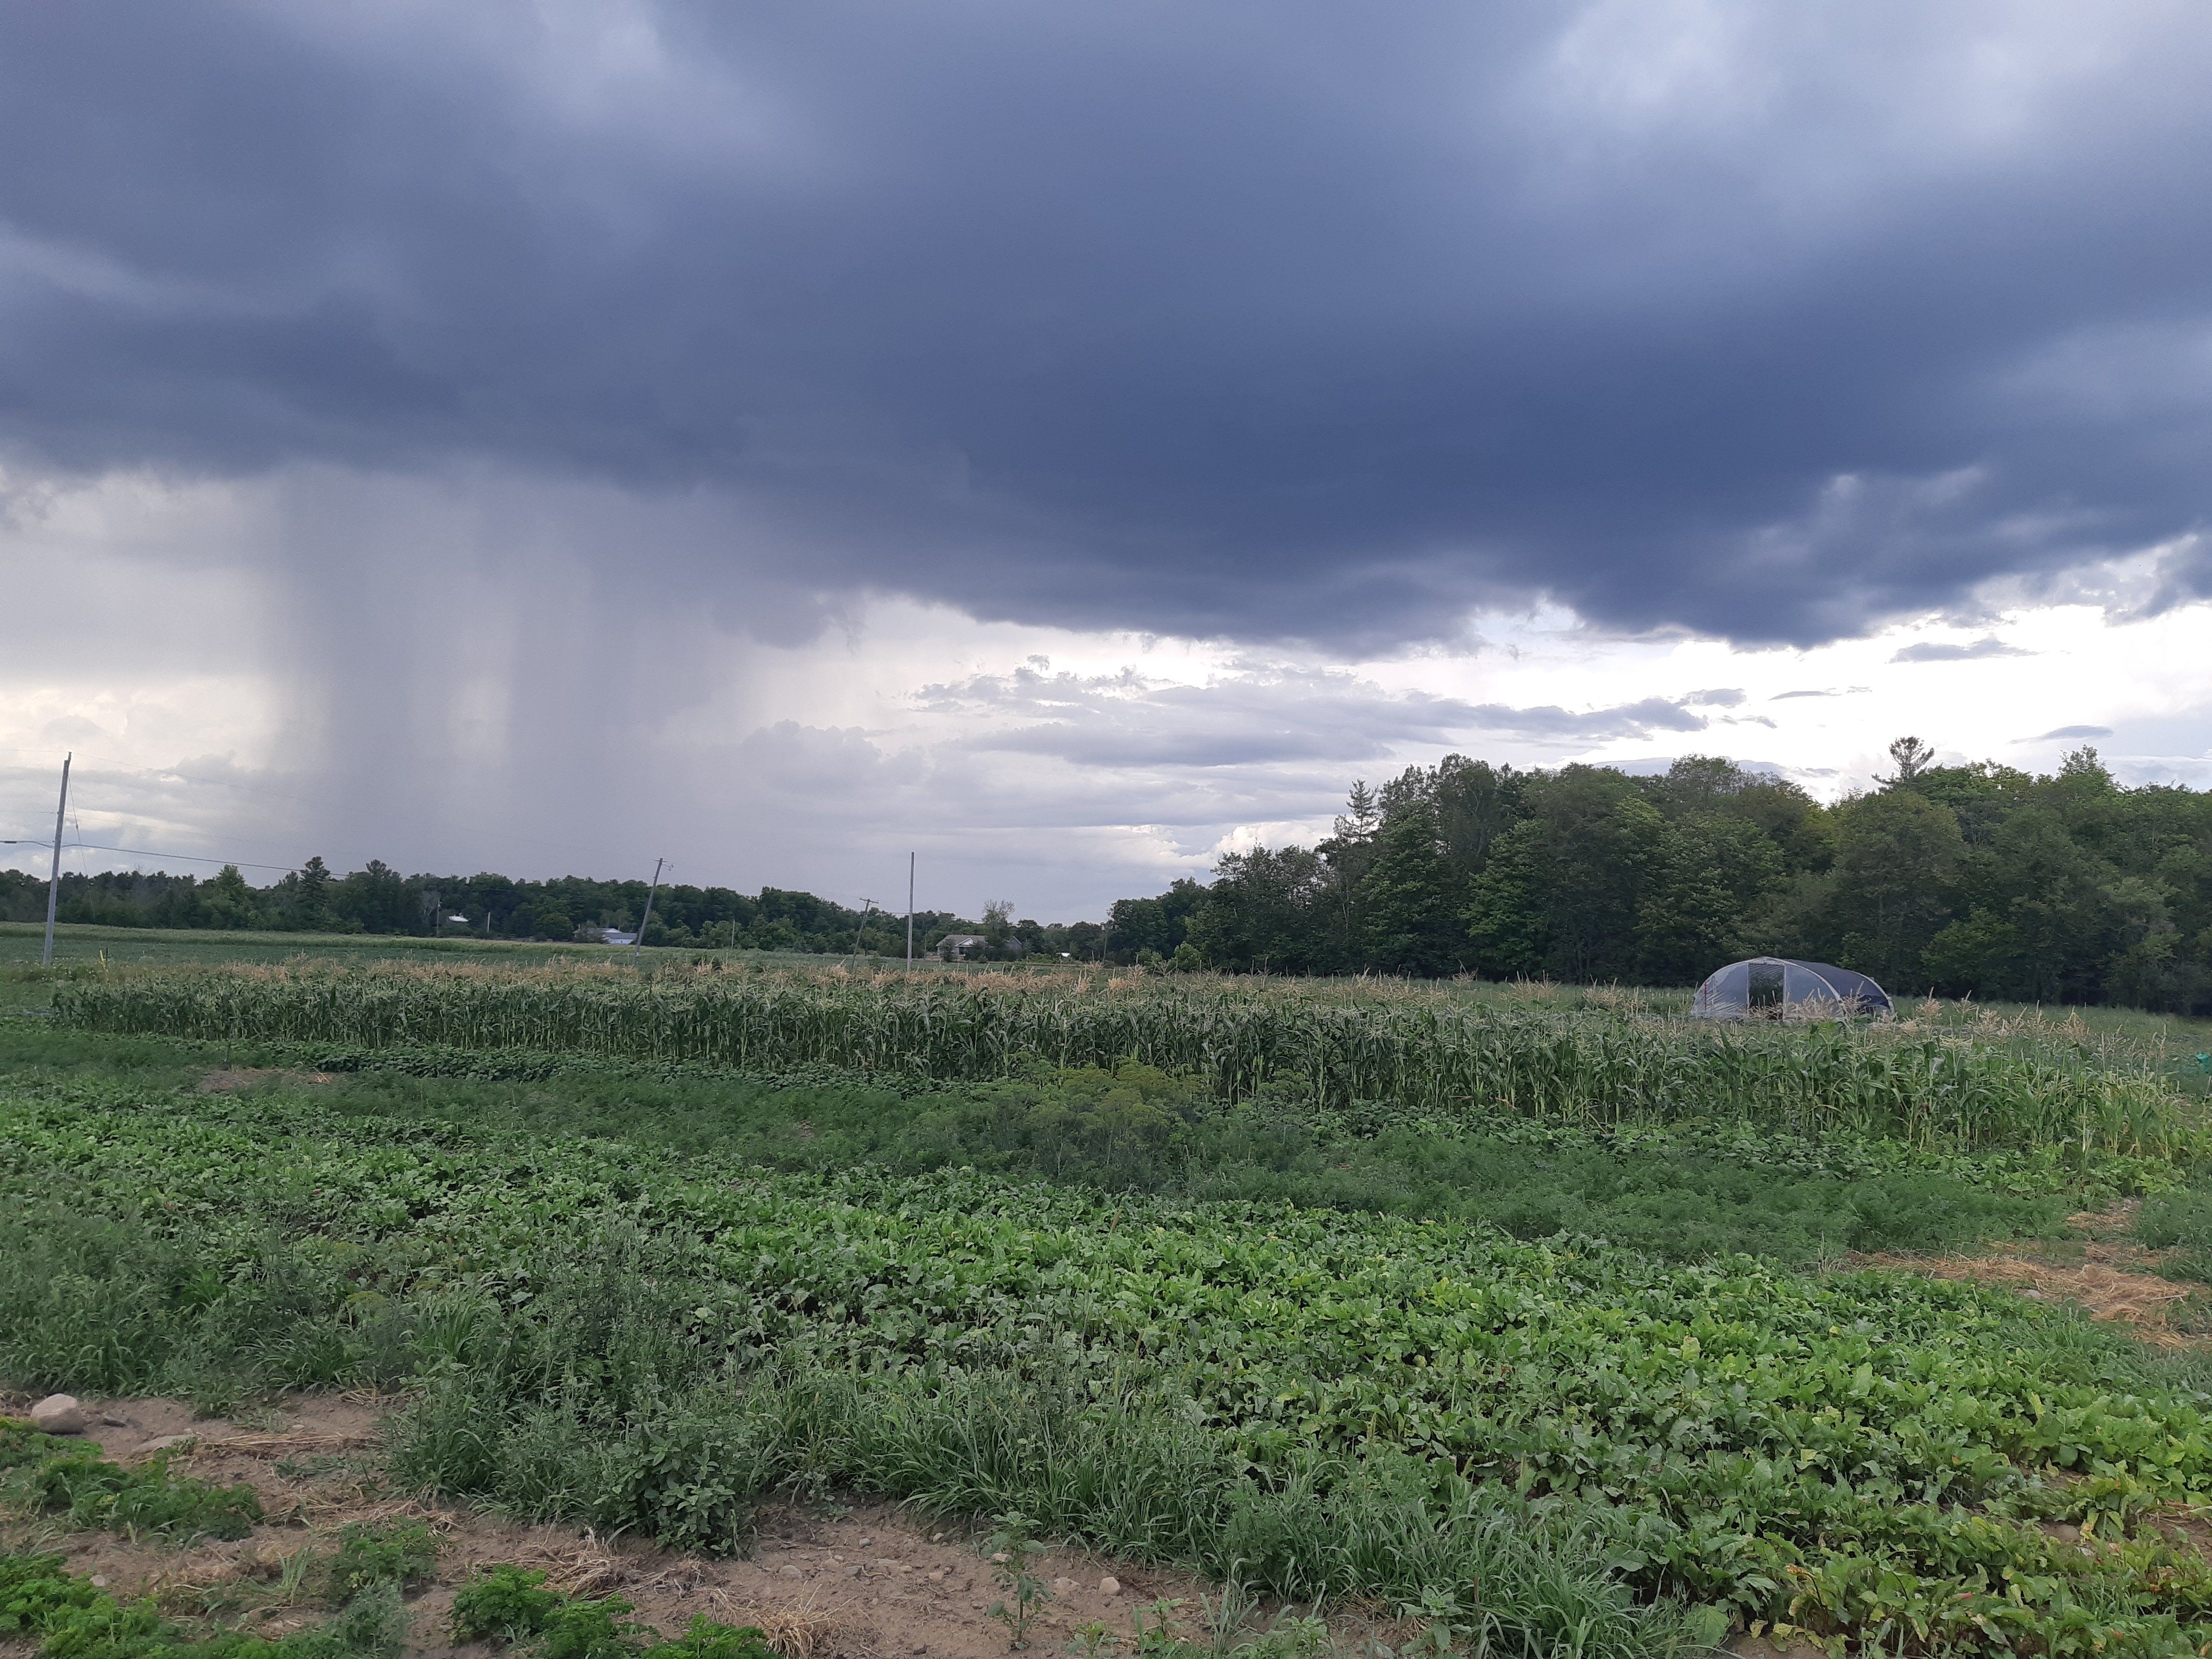 Next Happening: Farm Happenings for August 6, 2020